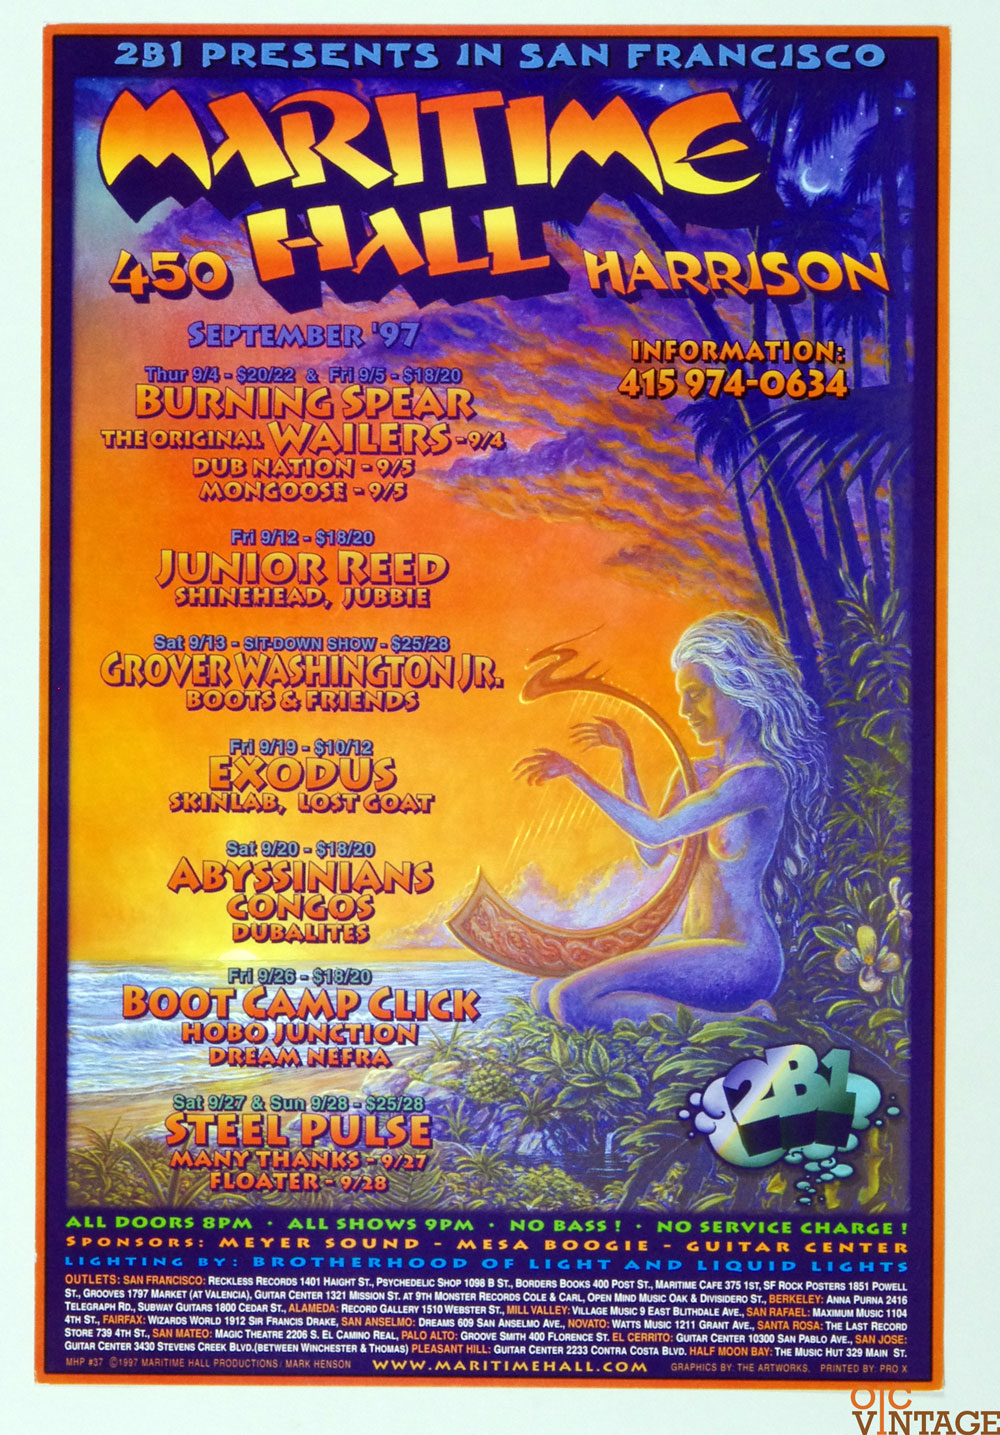 Maritime Hall 1997 Sep Poster Steel Pulse Grover Washing Jr Wailers 